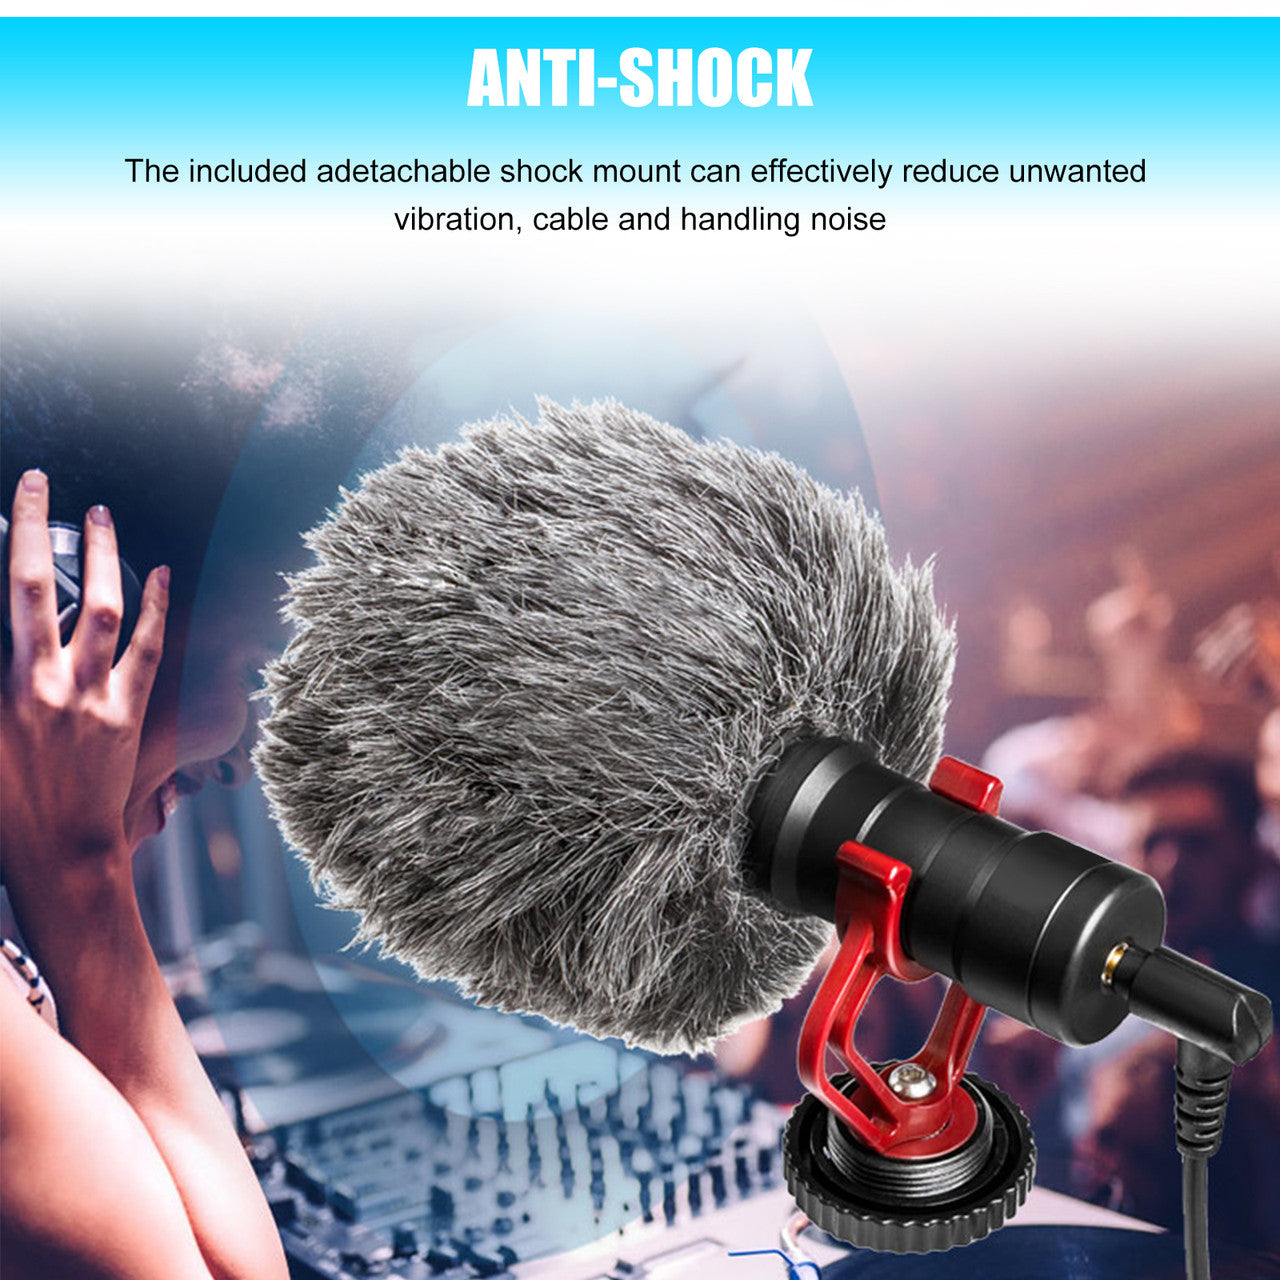 Camera Video Microphone, 3.5mm Professional Cardioid Recording Shotgun Microphone with Shock Mount, Windscreen, Carrying Bag, Fit for DSLR, iPhone, Android, Canon/Nikon/Sony Camera, Camcorder